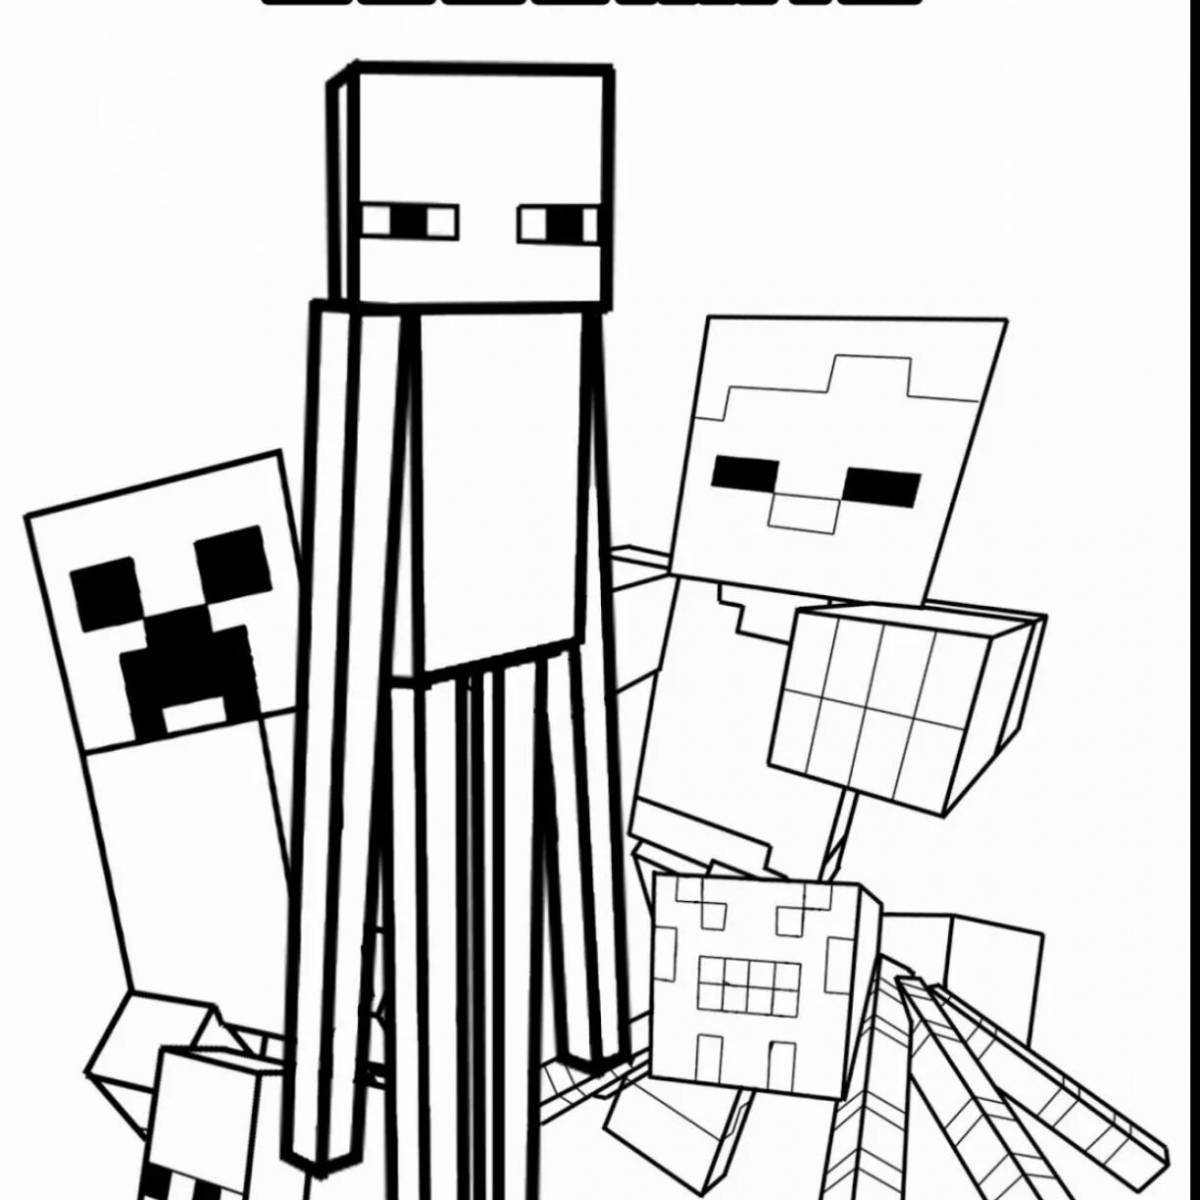 Sweet minecraft sloth coloring